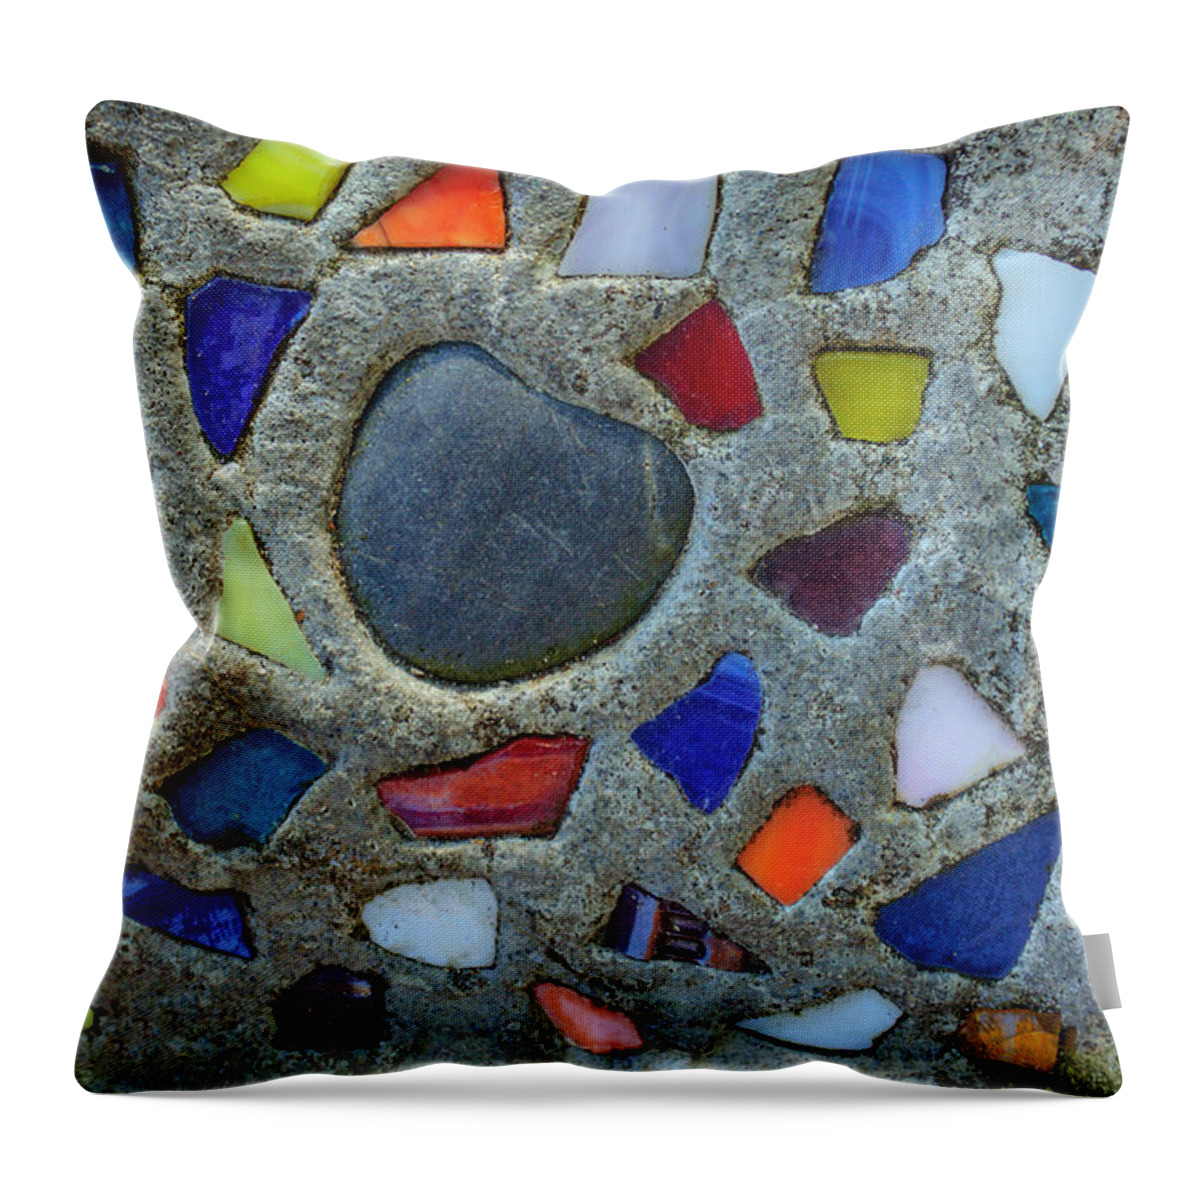 Glass Throw Pillow featuring the photograph Artsy Glass Chip Sidewalk by Tikvah's Hope